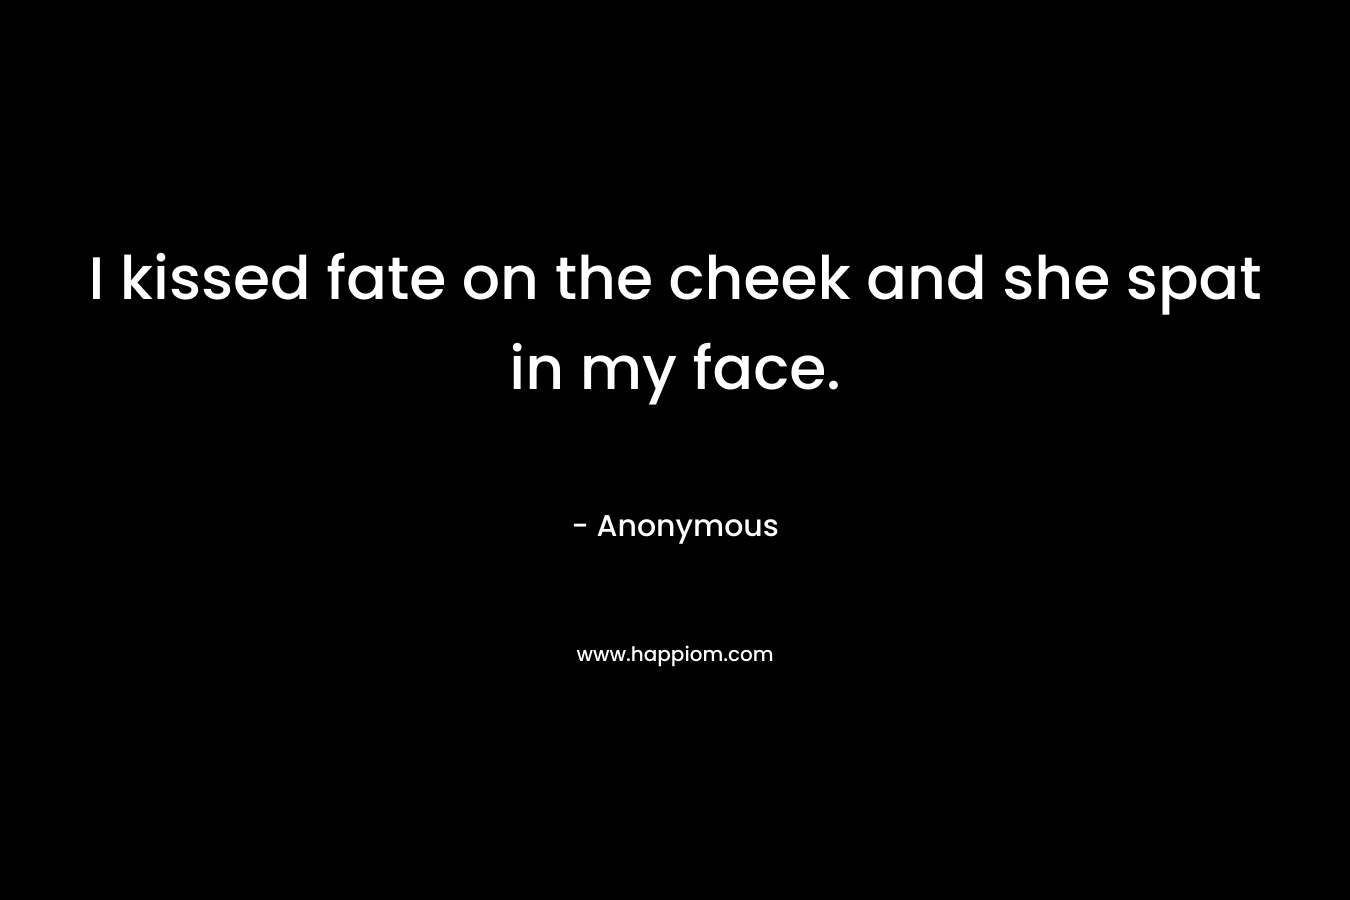 I kissed fate on the cheek and she spat in my face. – Anonymous